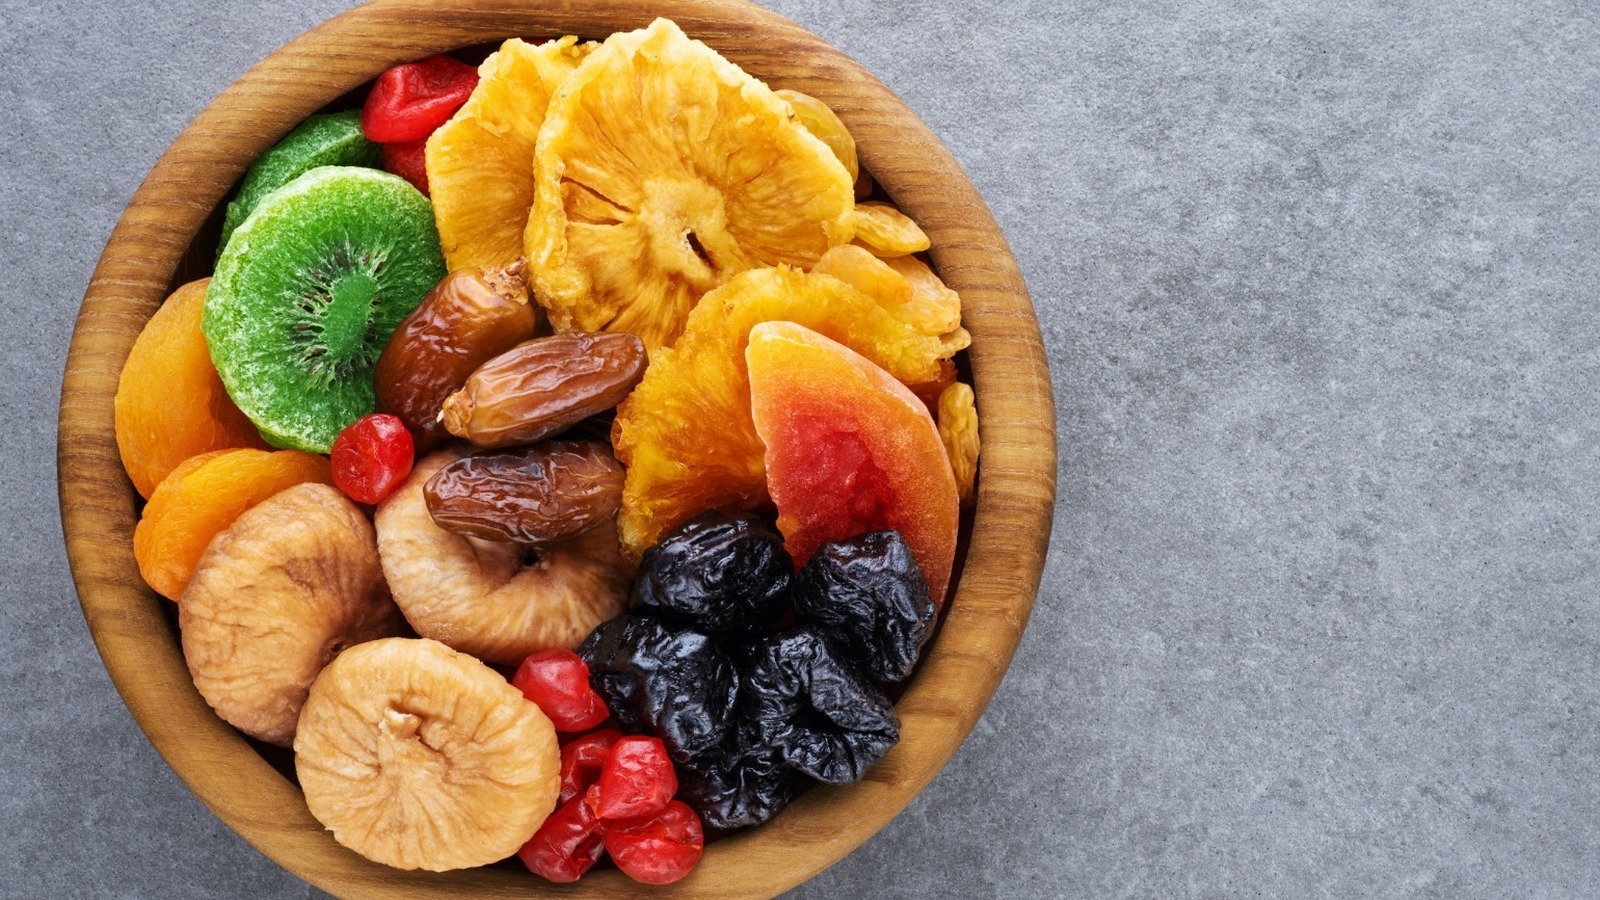 30 Healthy Snack Ideas That Won't Ruin Your Diet